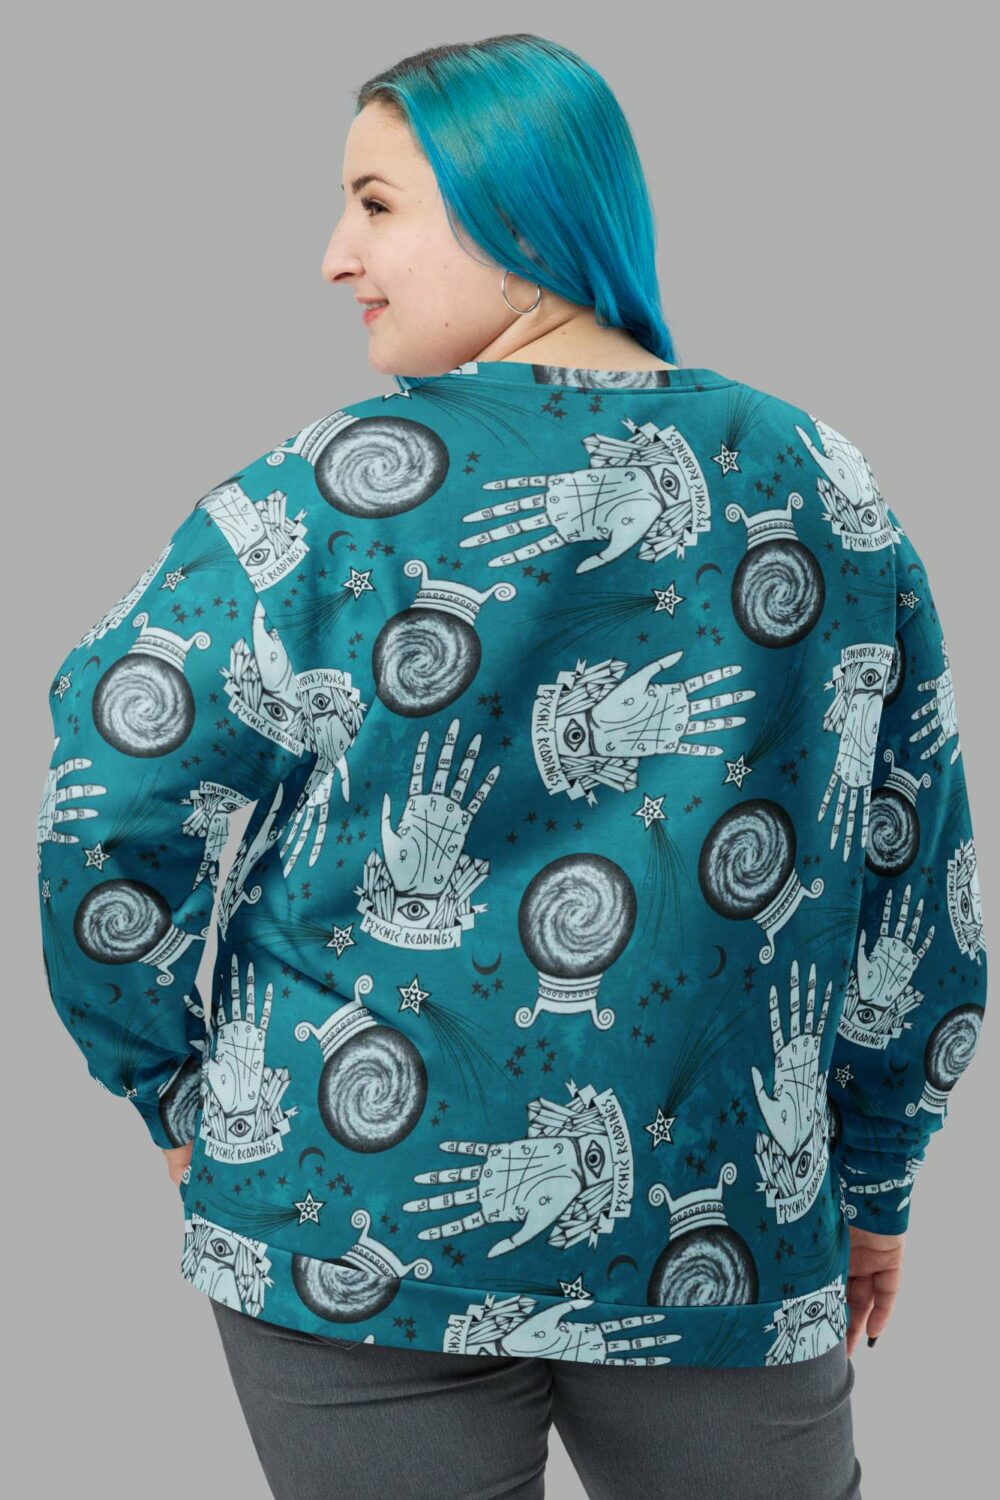 cosmic drifters clairvoyant print sweater back